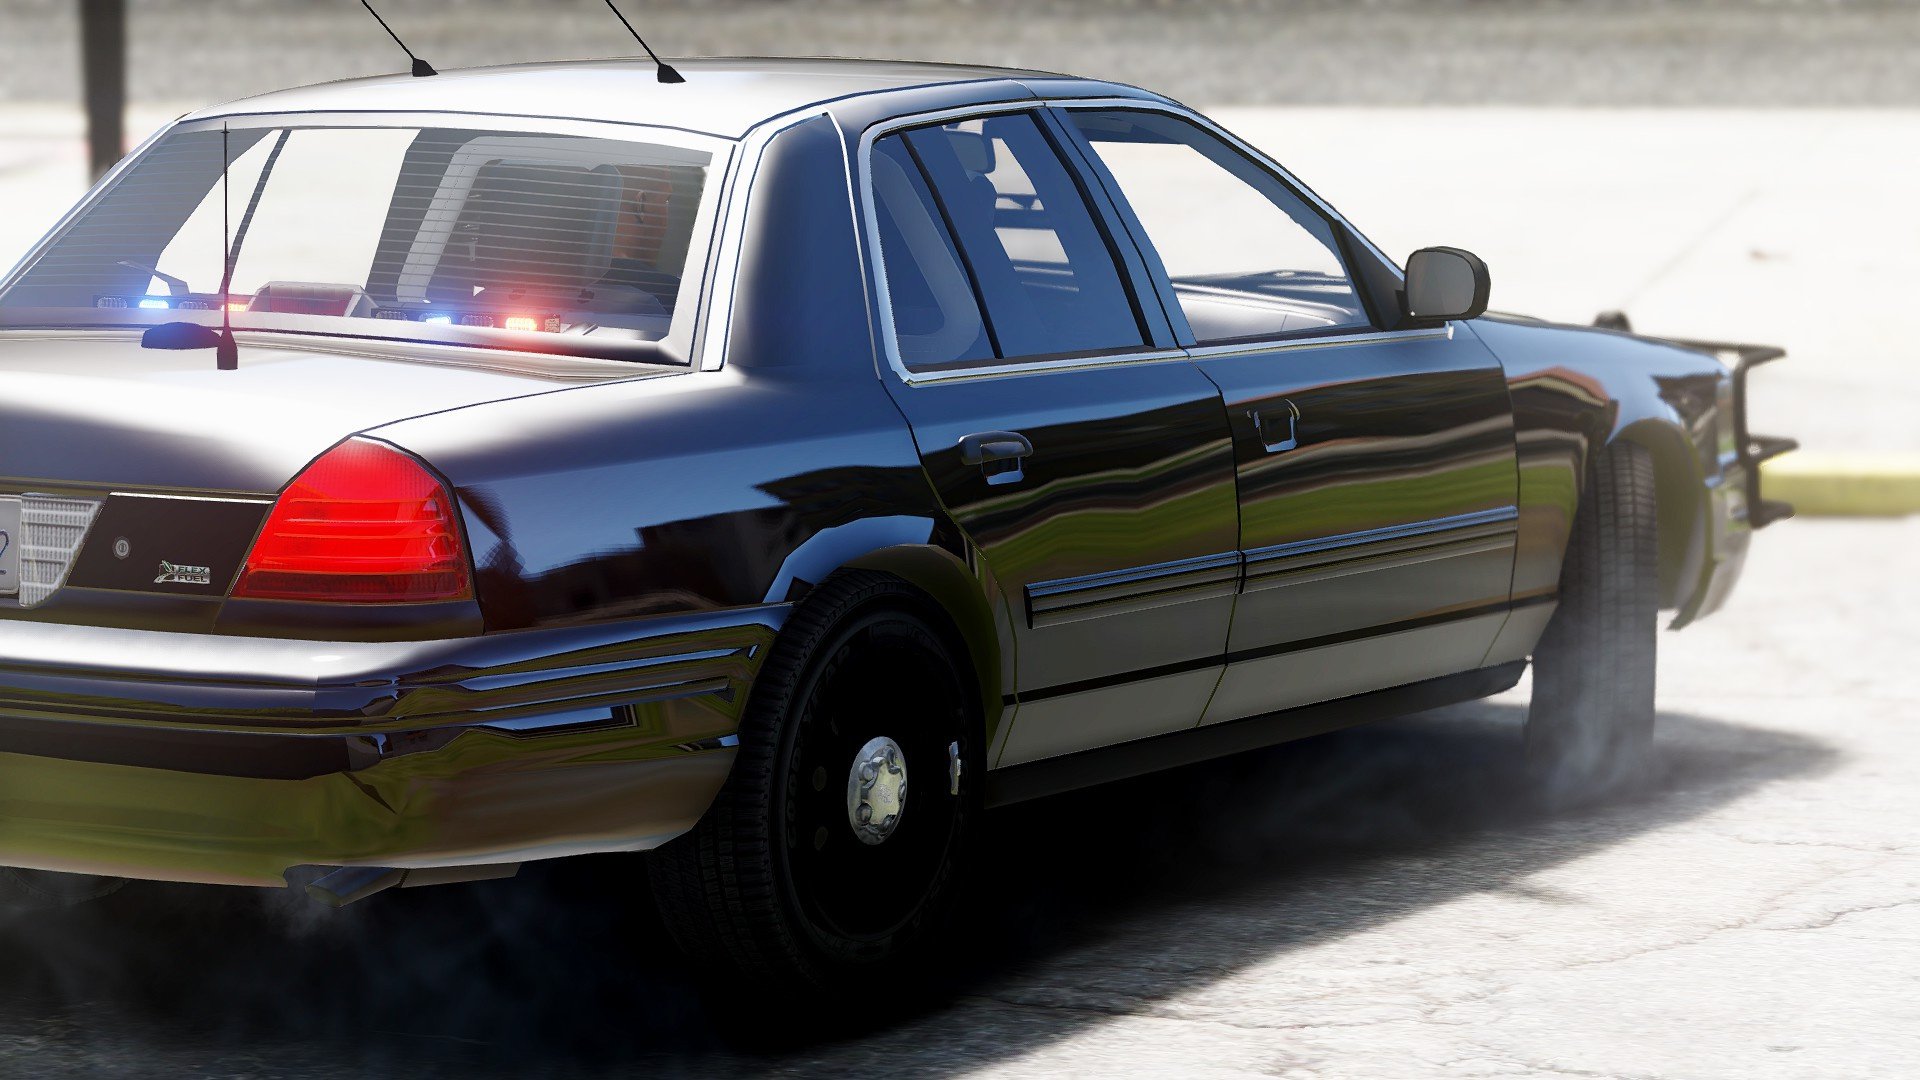 2011 Unmarked Crown Vic.